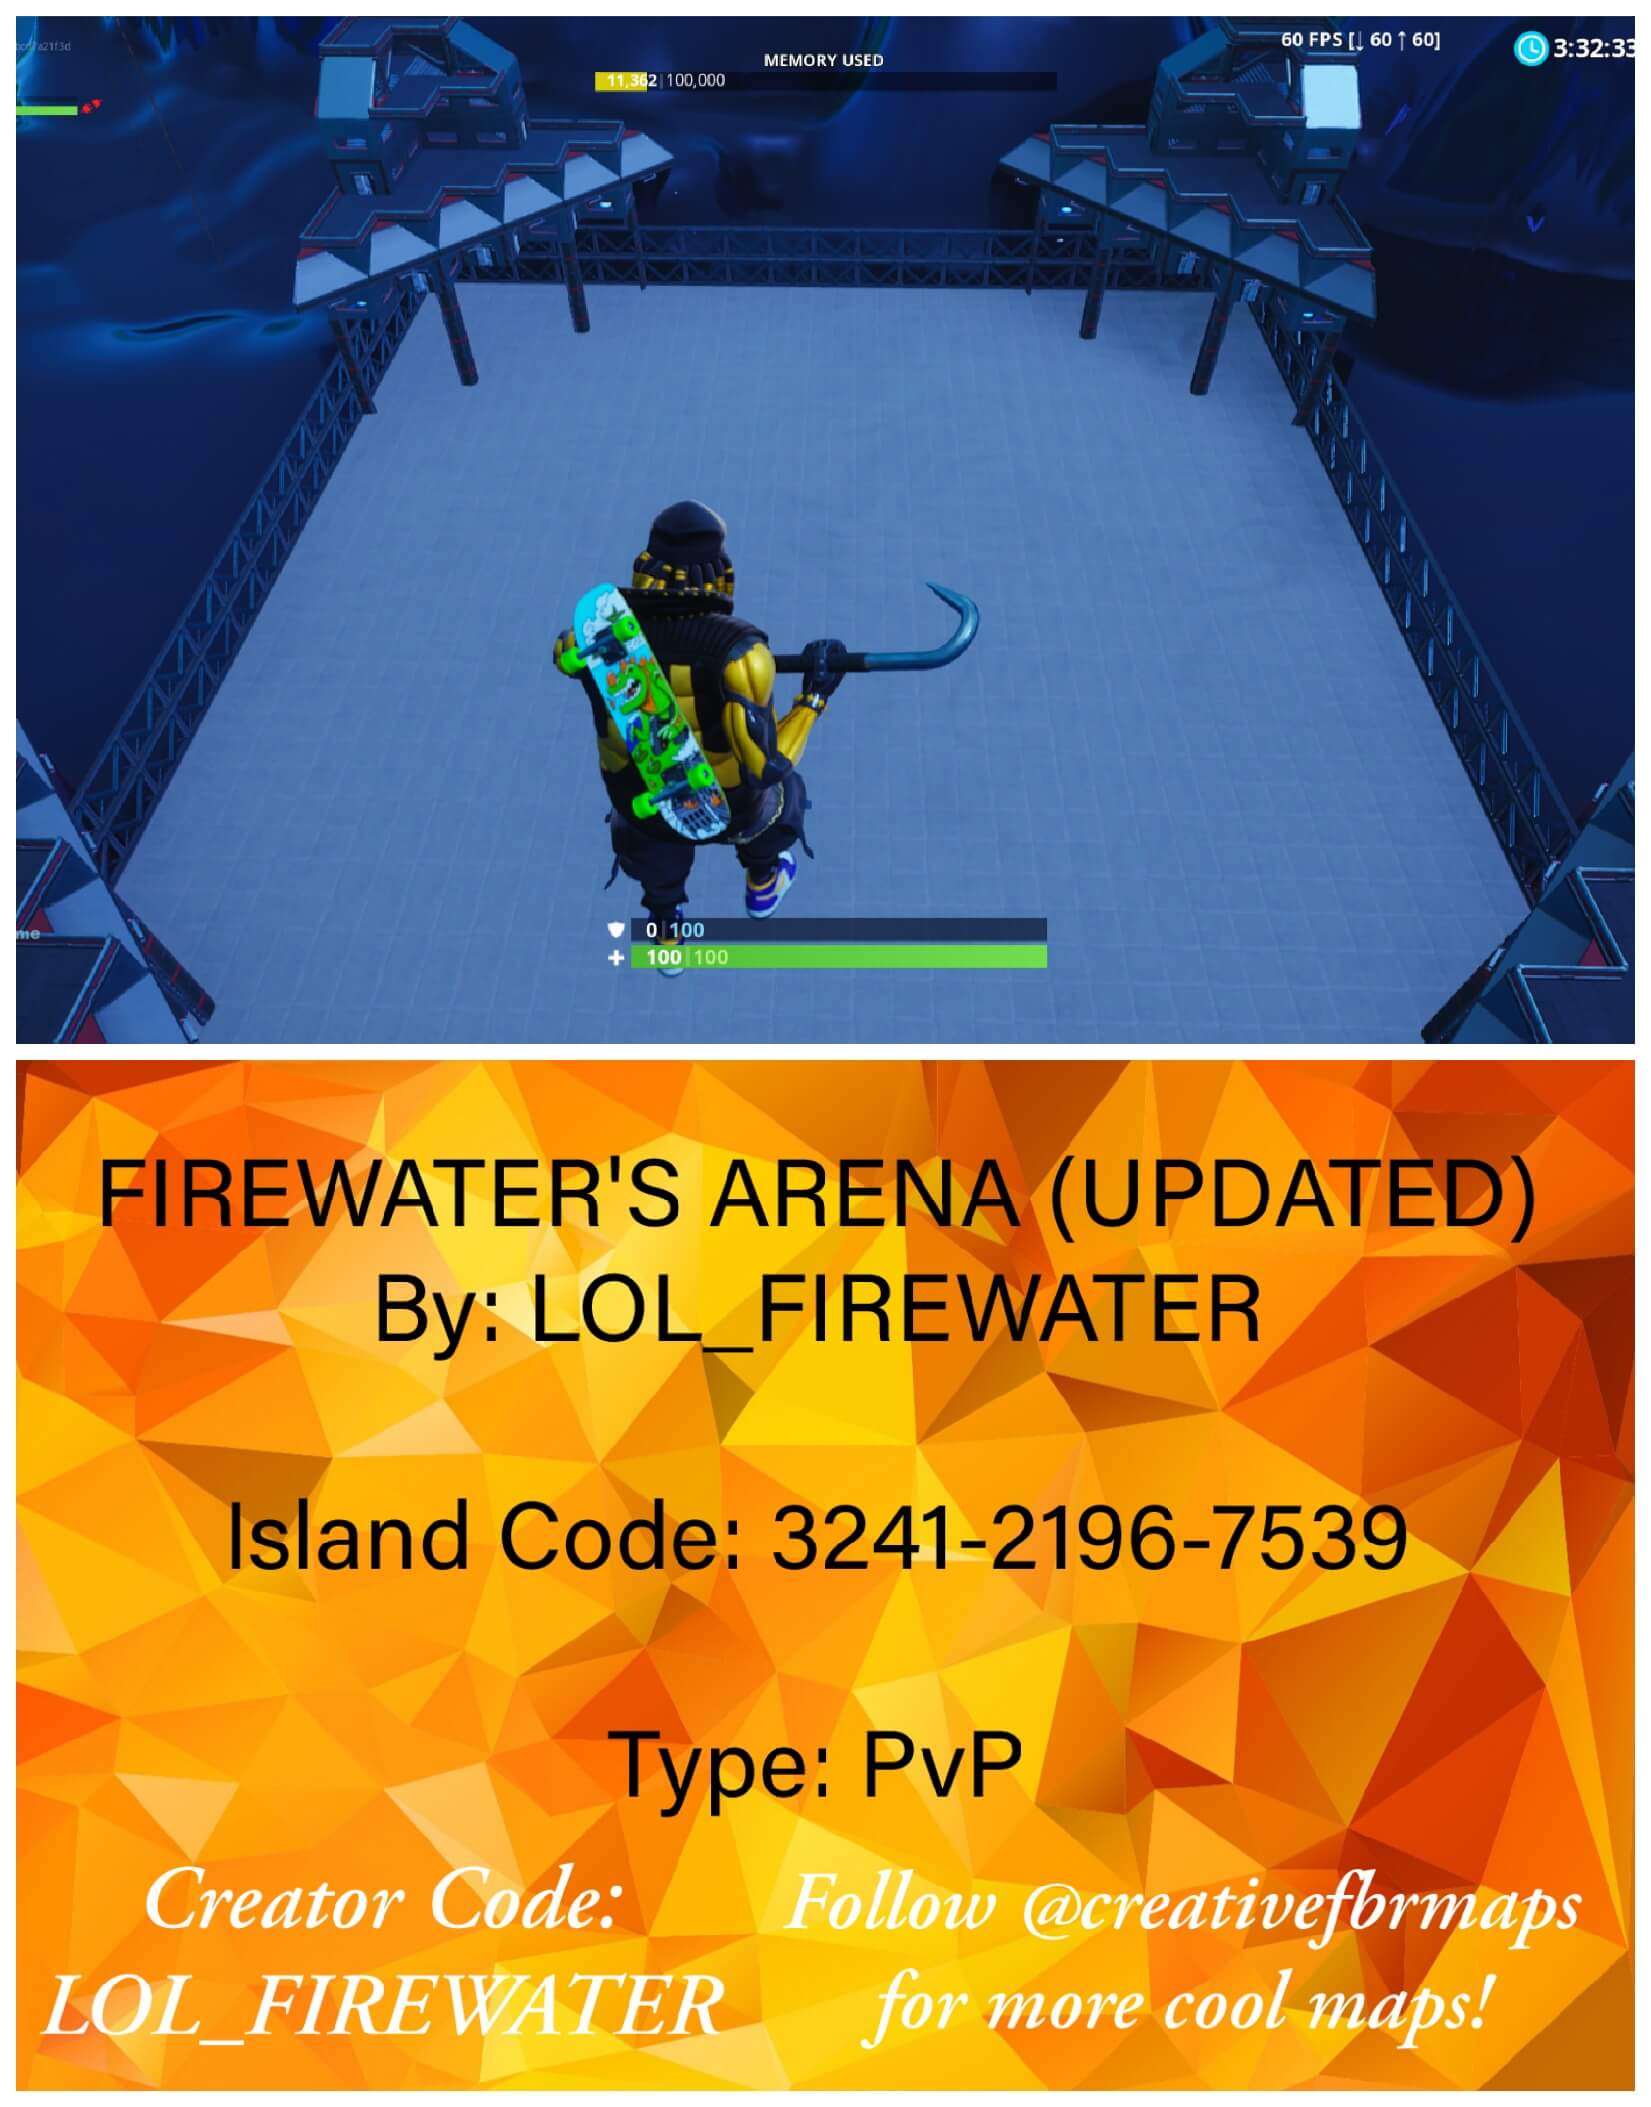 FIREWATER'S ARENA